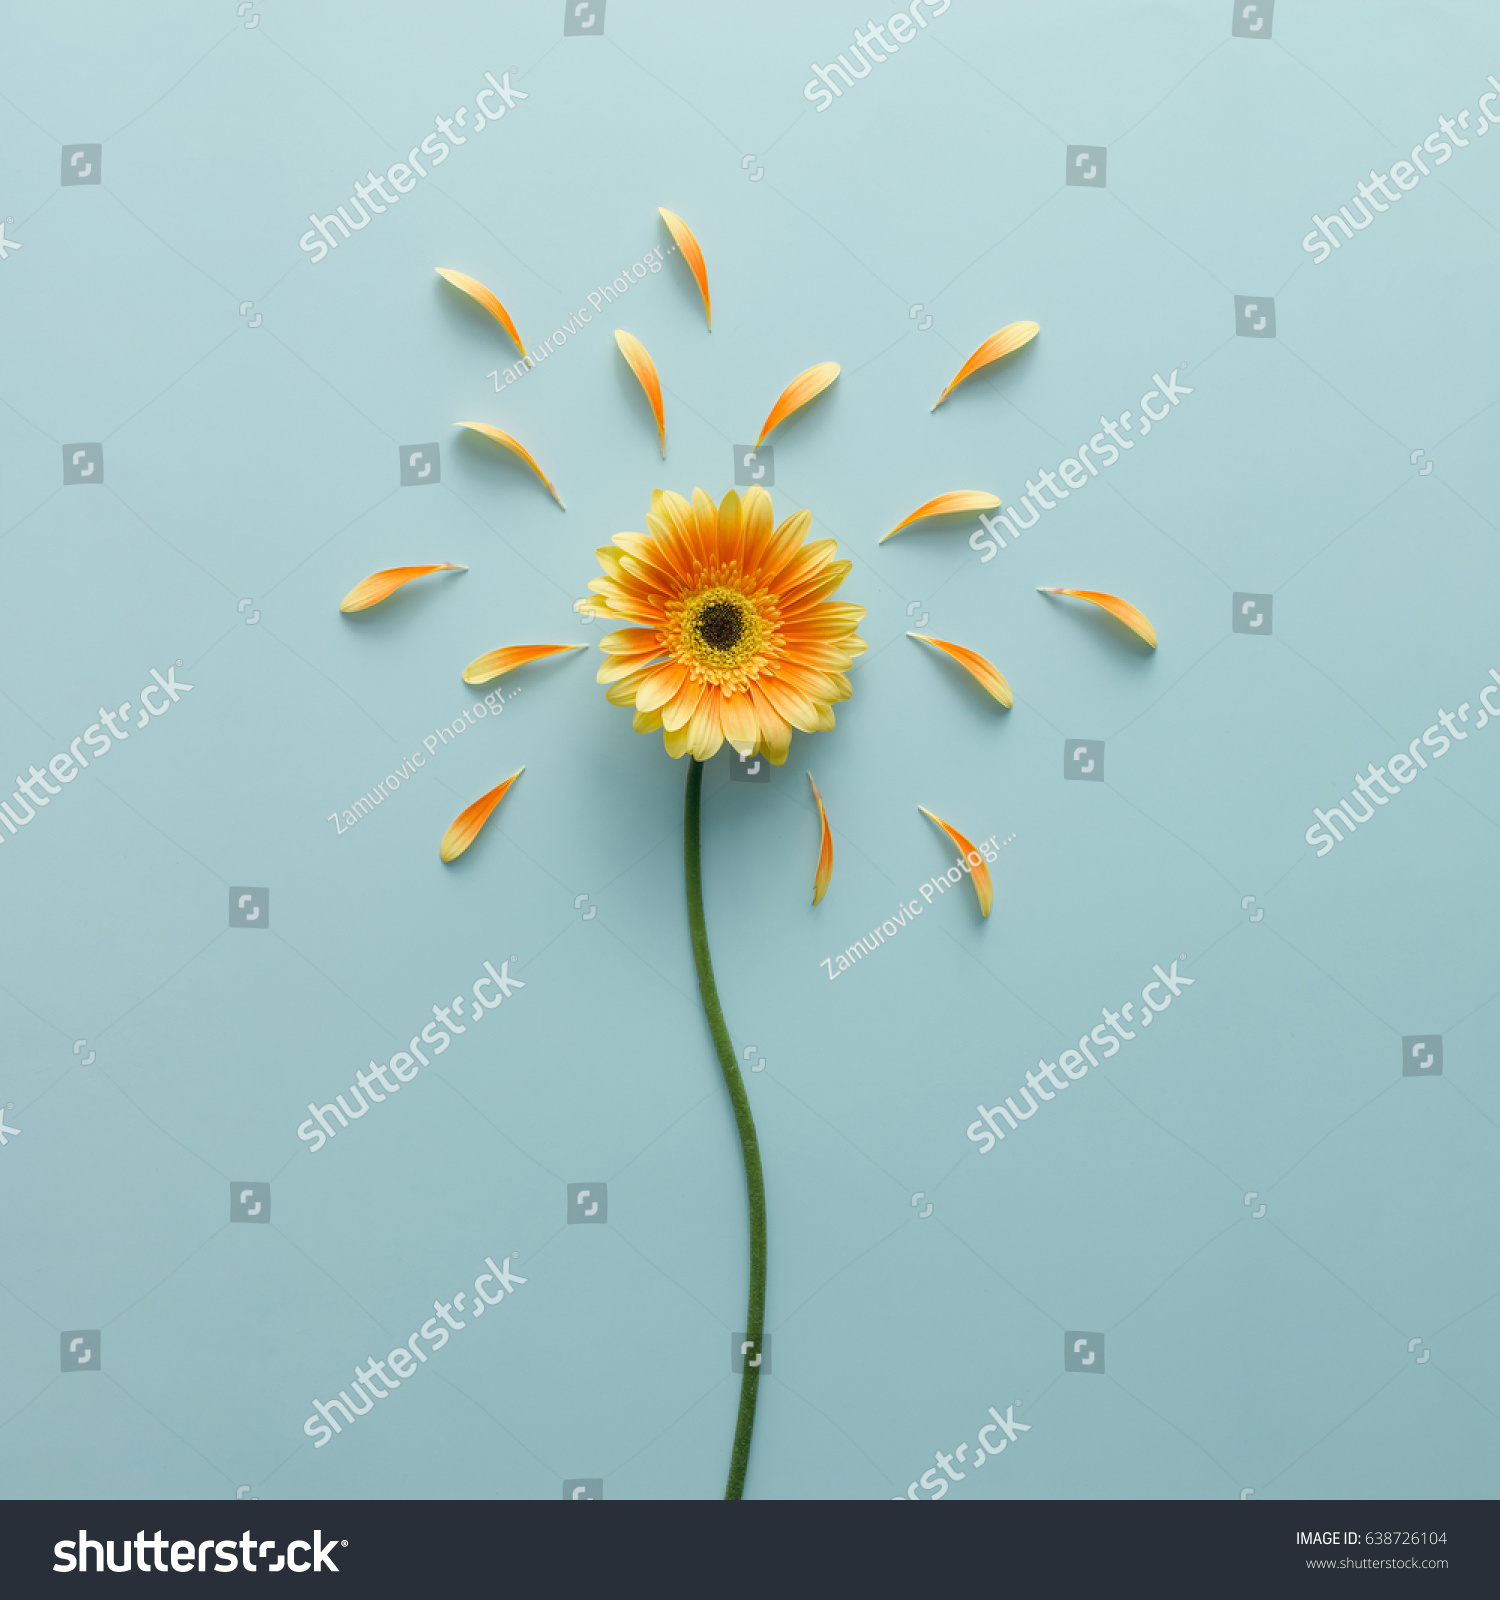 Yellow flower on bright blue background with petals. Emotion concept. Summer flat lay. #638726104